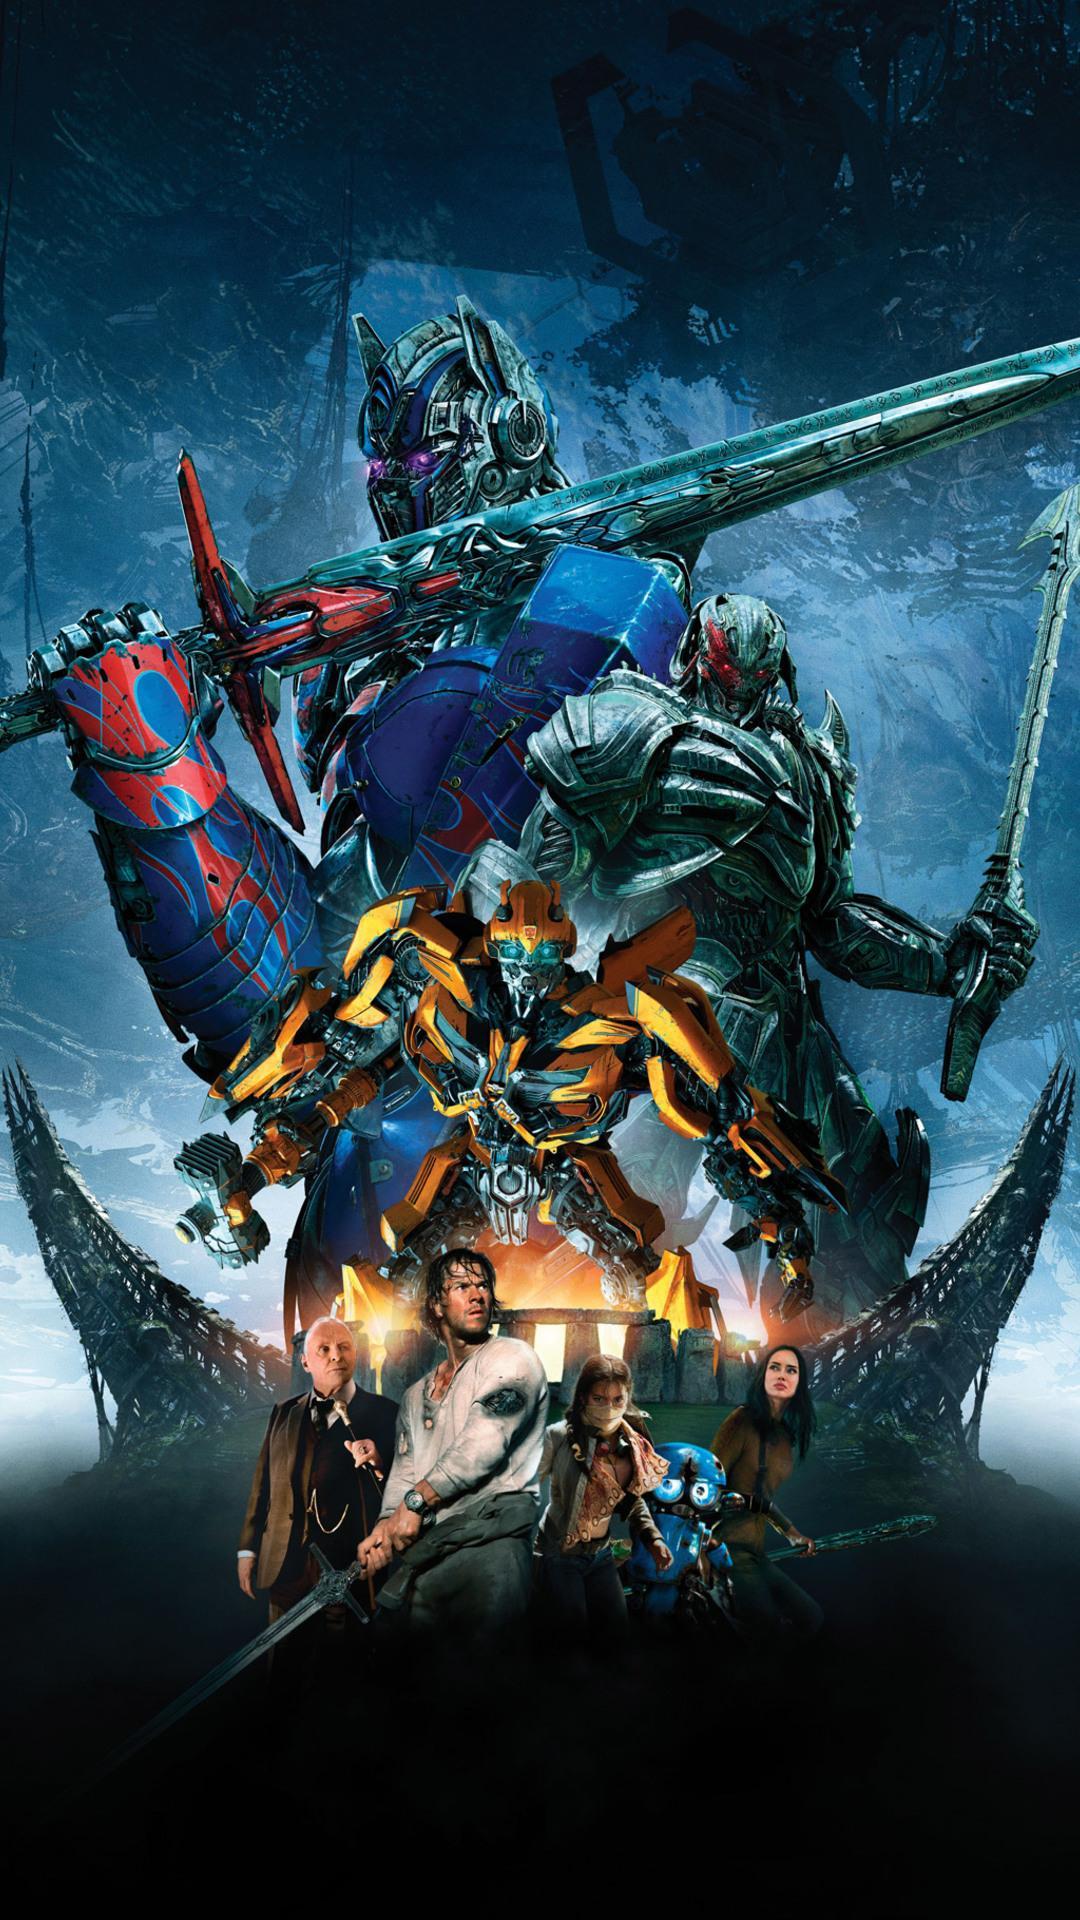 Transformer HD Wallpaper For Android Apk